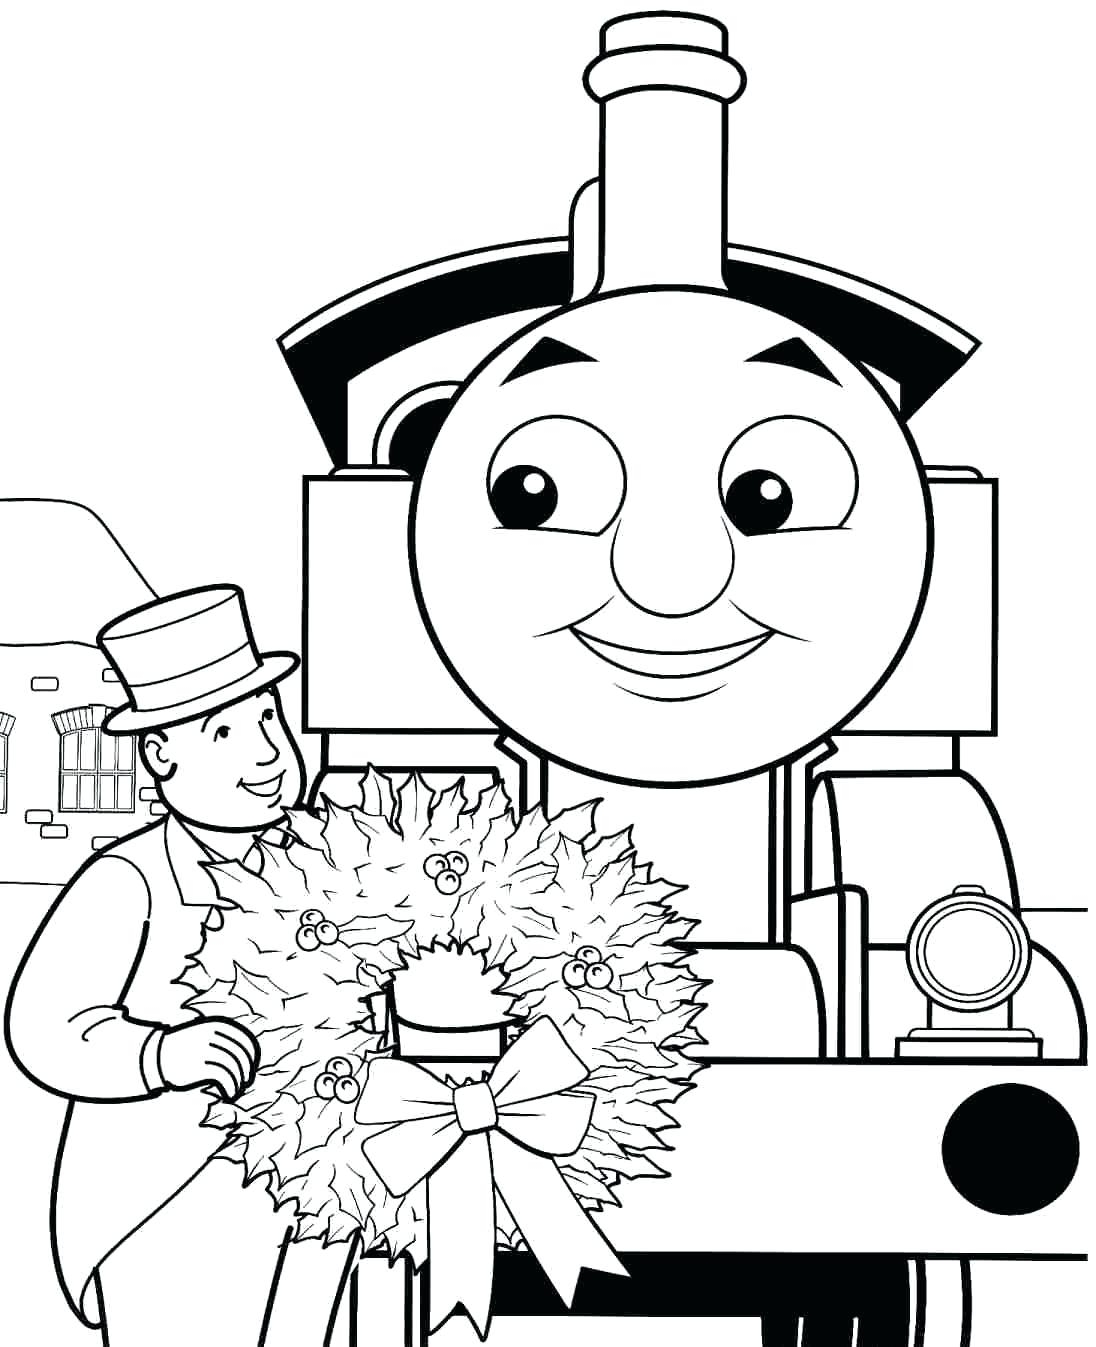 Thomas The Tank Colouring Pages At Getcolorings.com | Free Printable